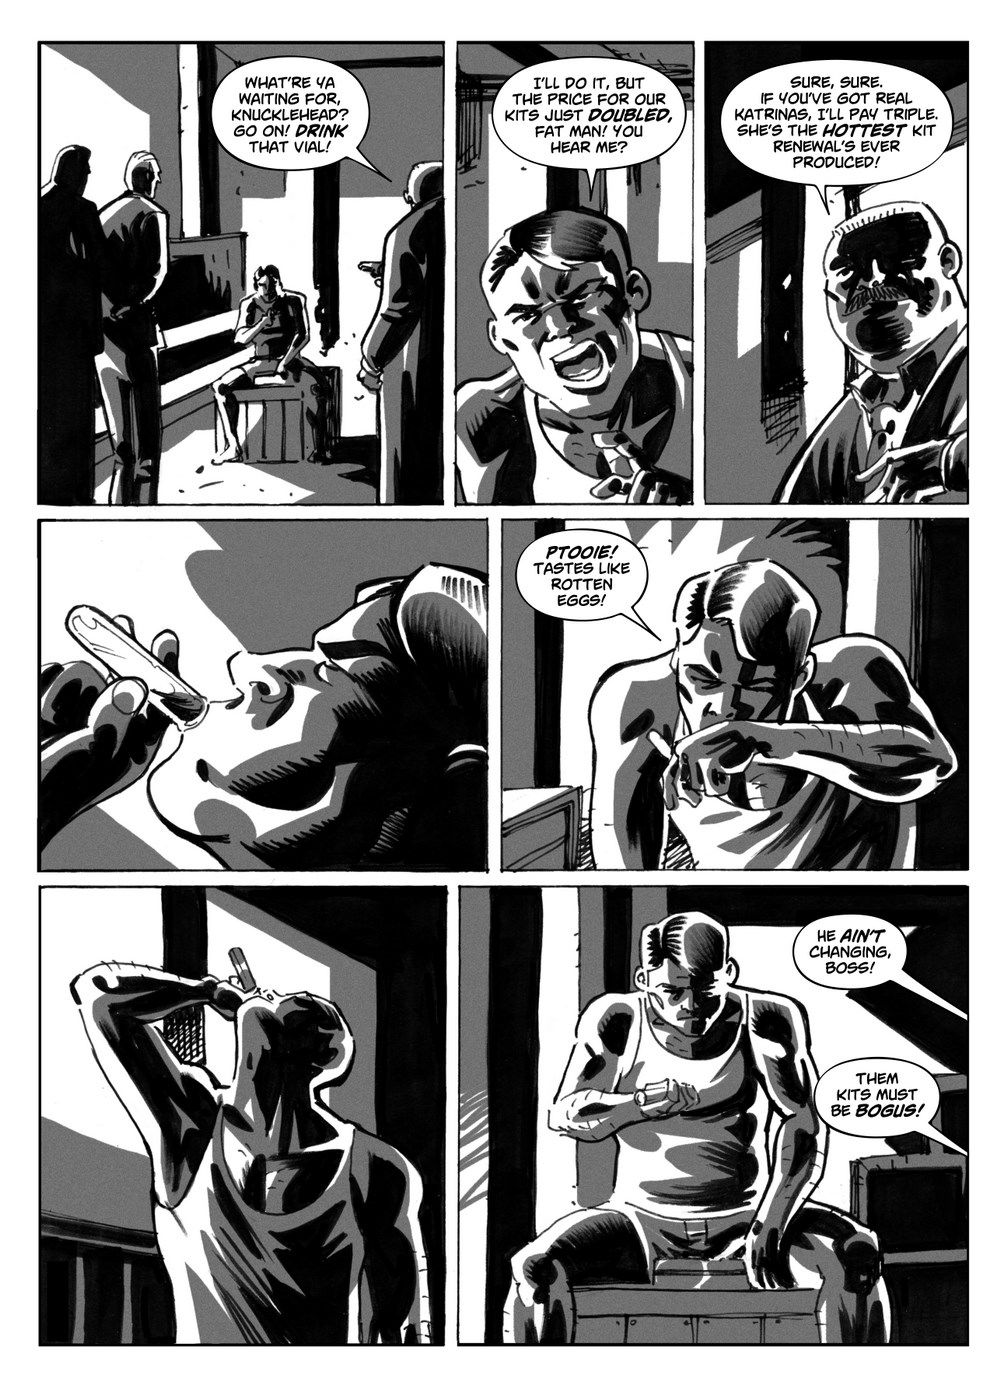 The Supermodel Transformation Kit - Busted TGComics page 5